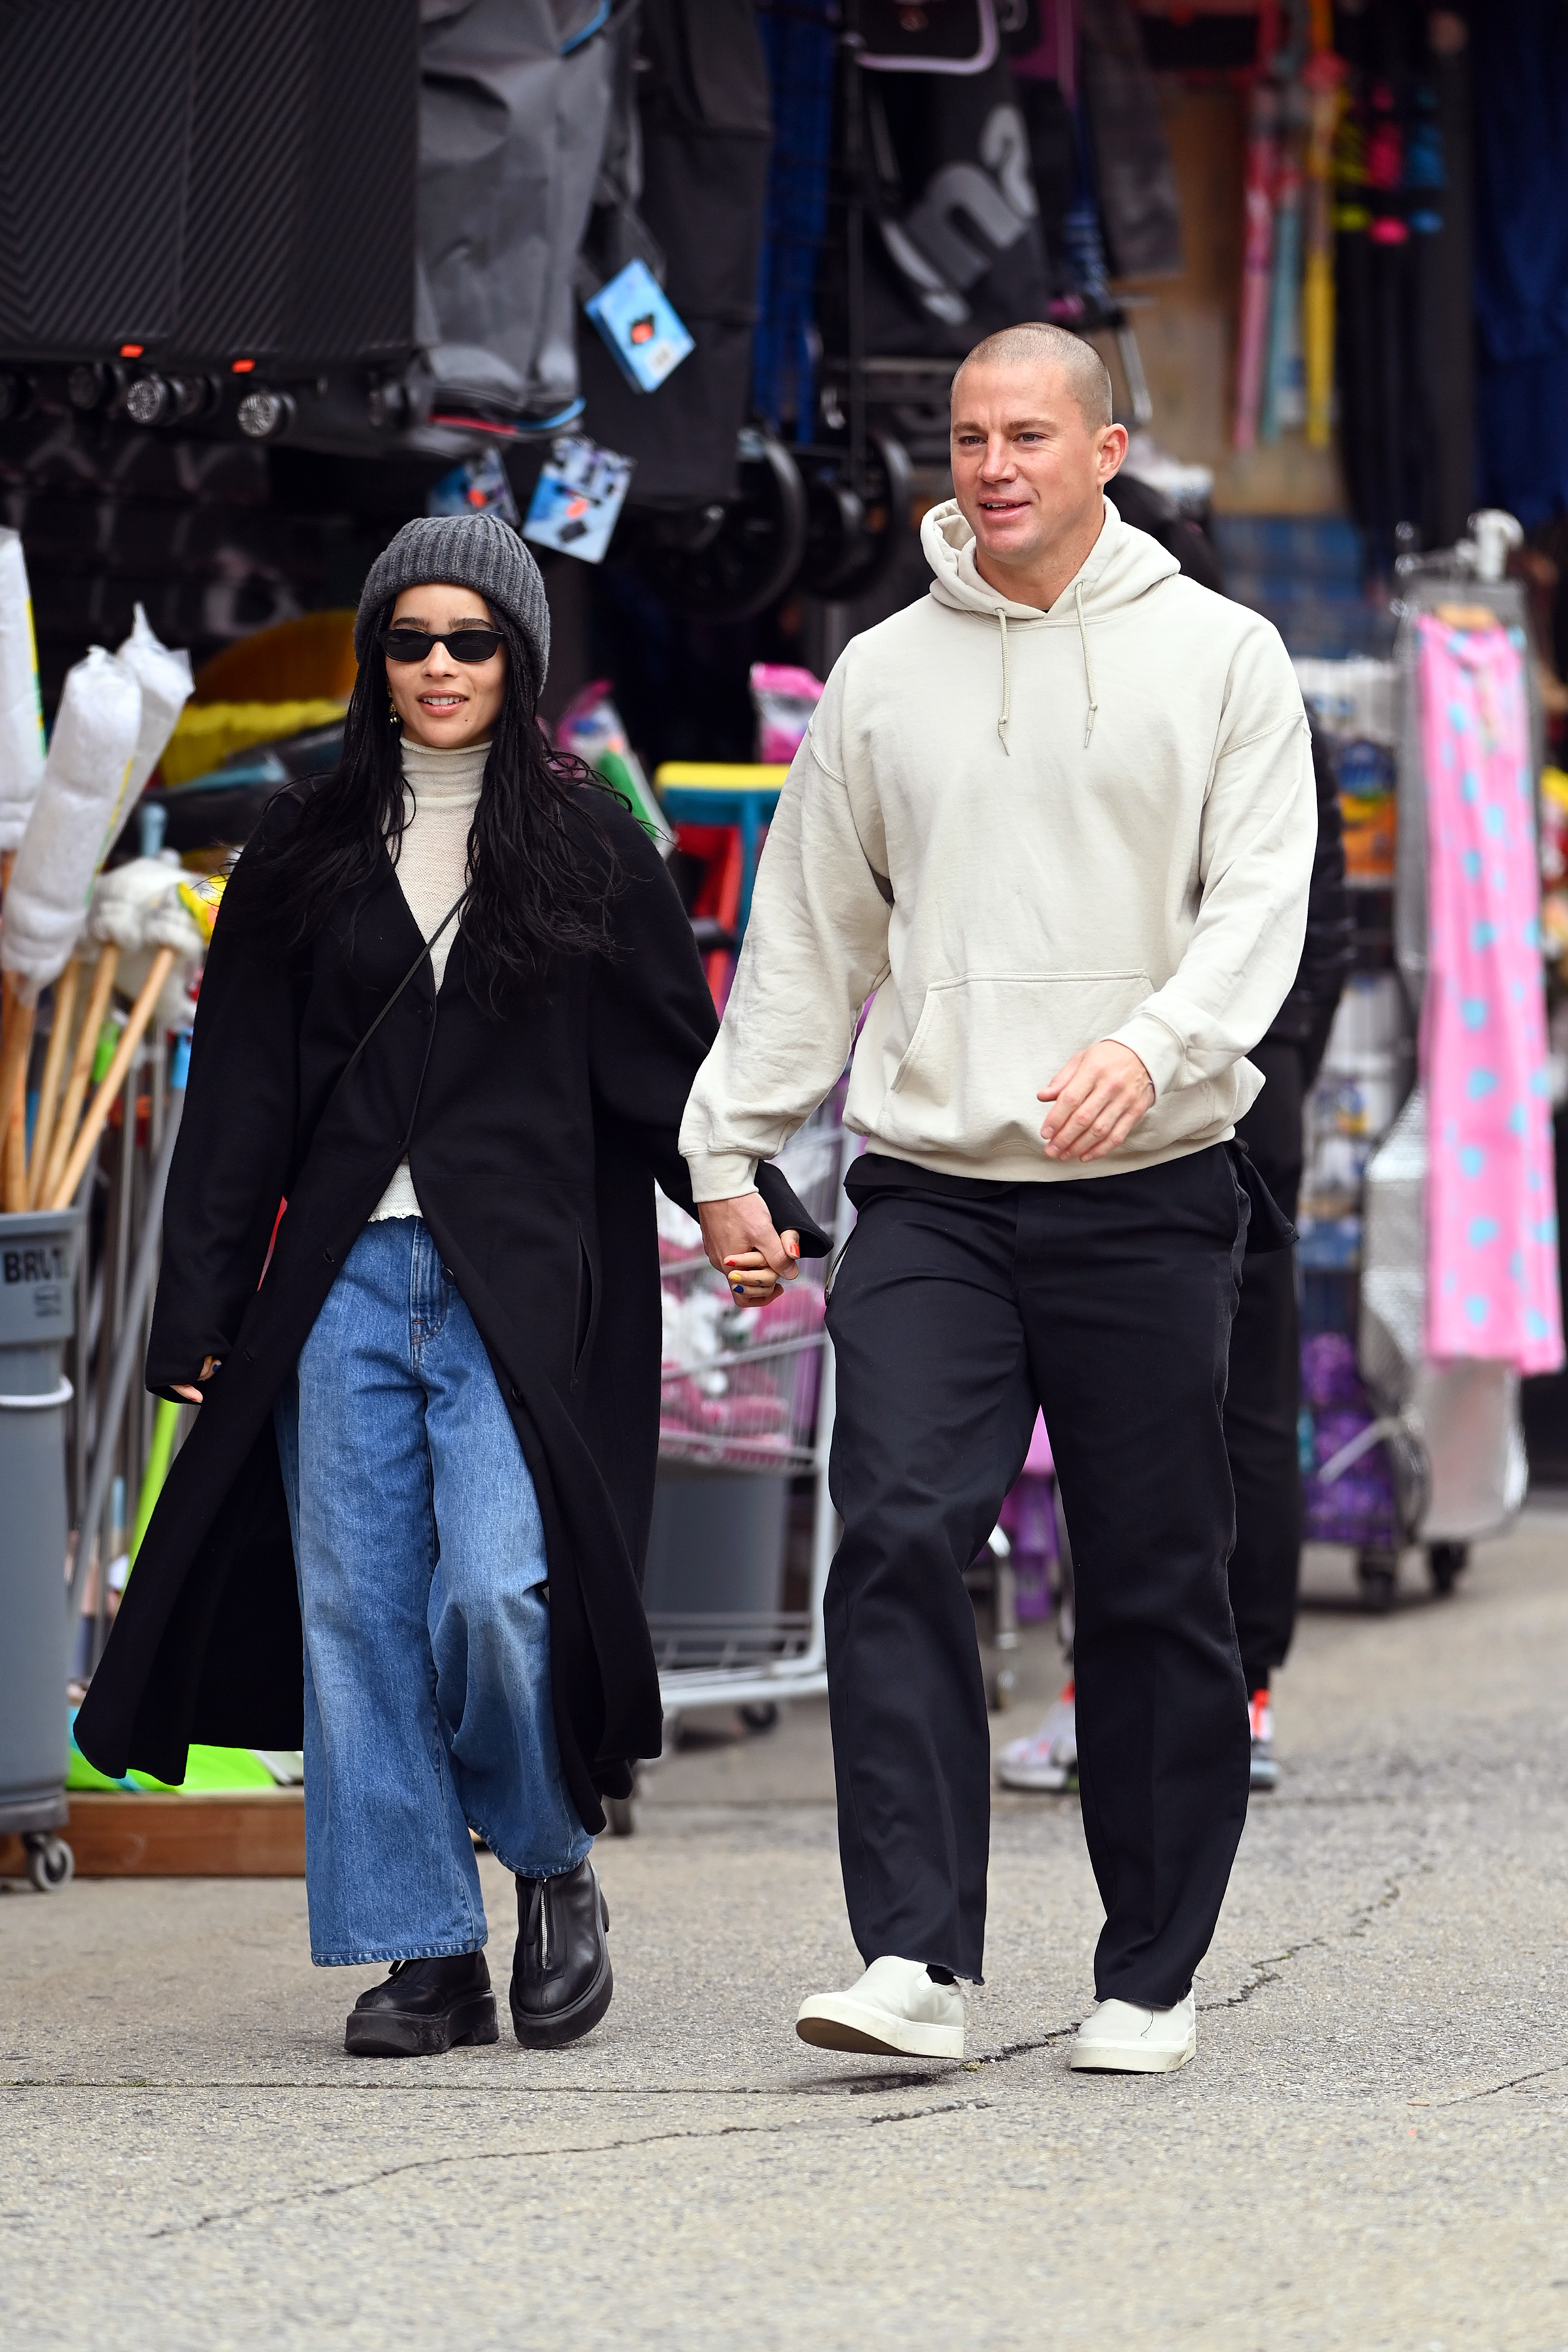 Zoë Kravitz and Channing Tatum date outfits